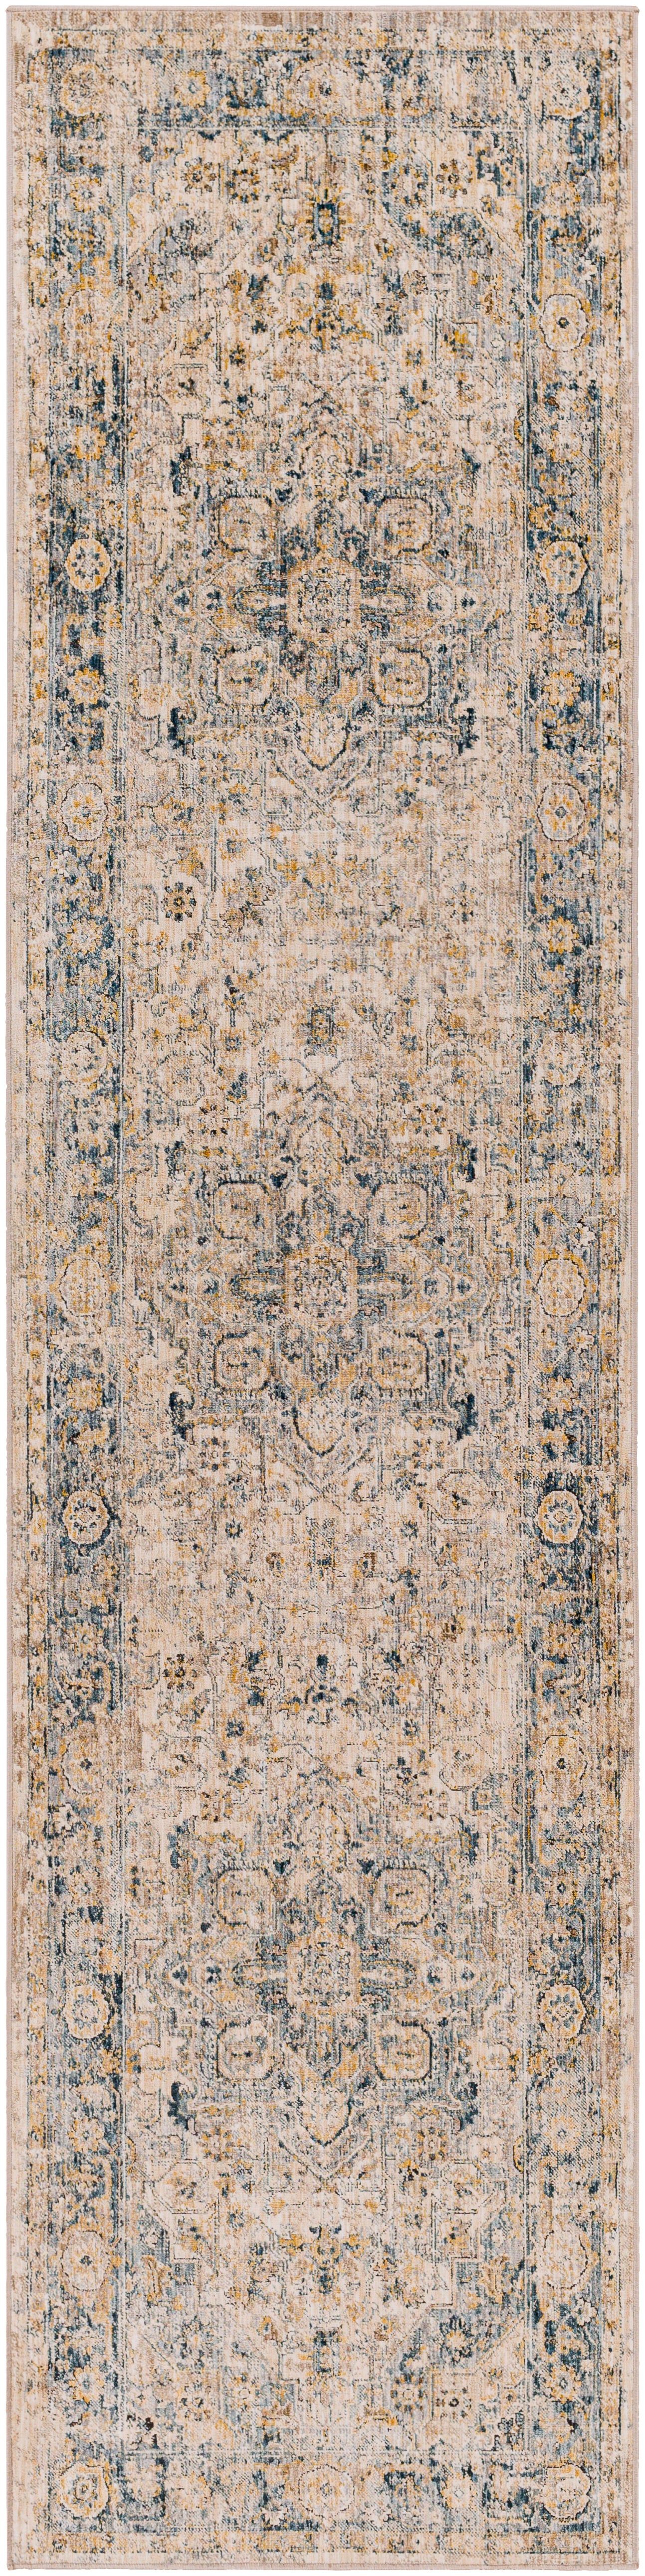 Aspendos 30433 Machine Woven Synthetic Blend Indoor Area Rug by Surya Rugs